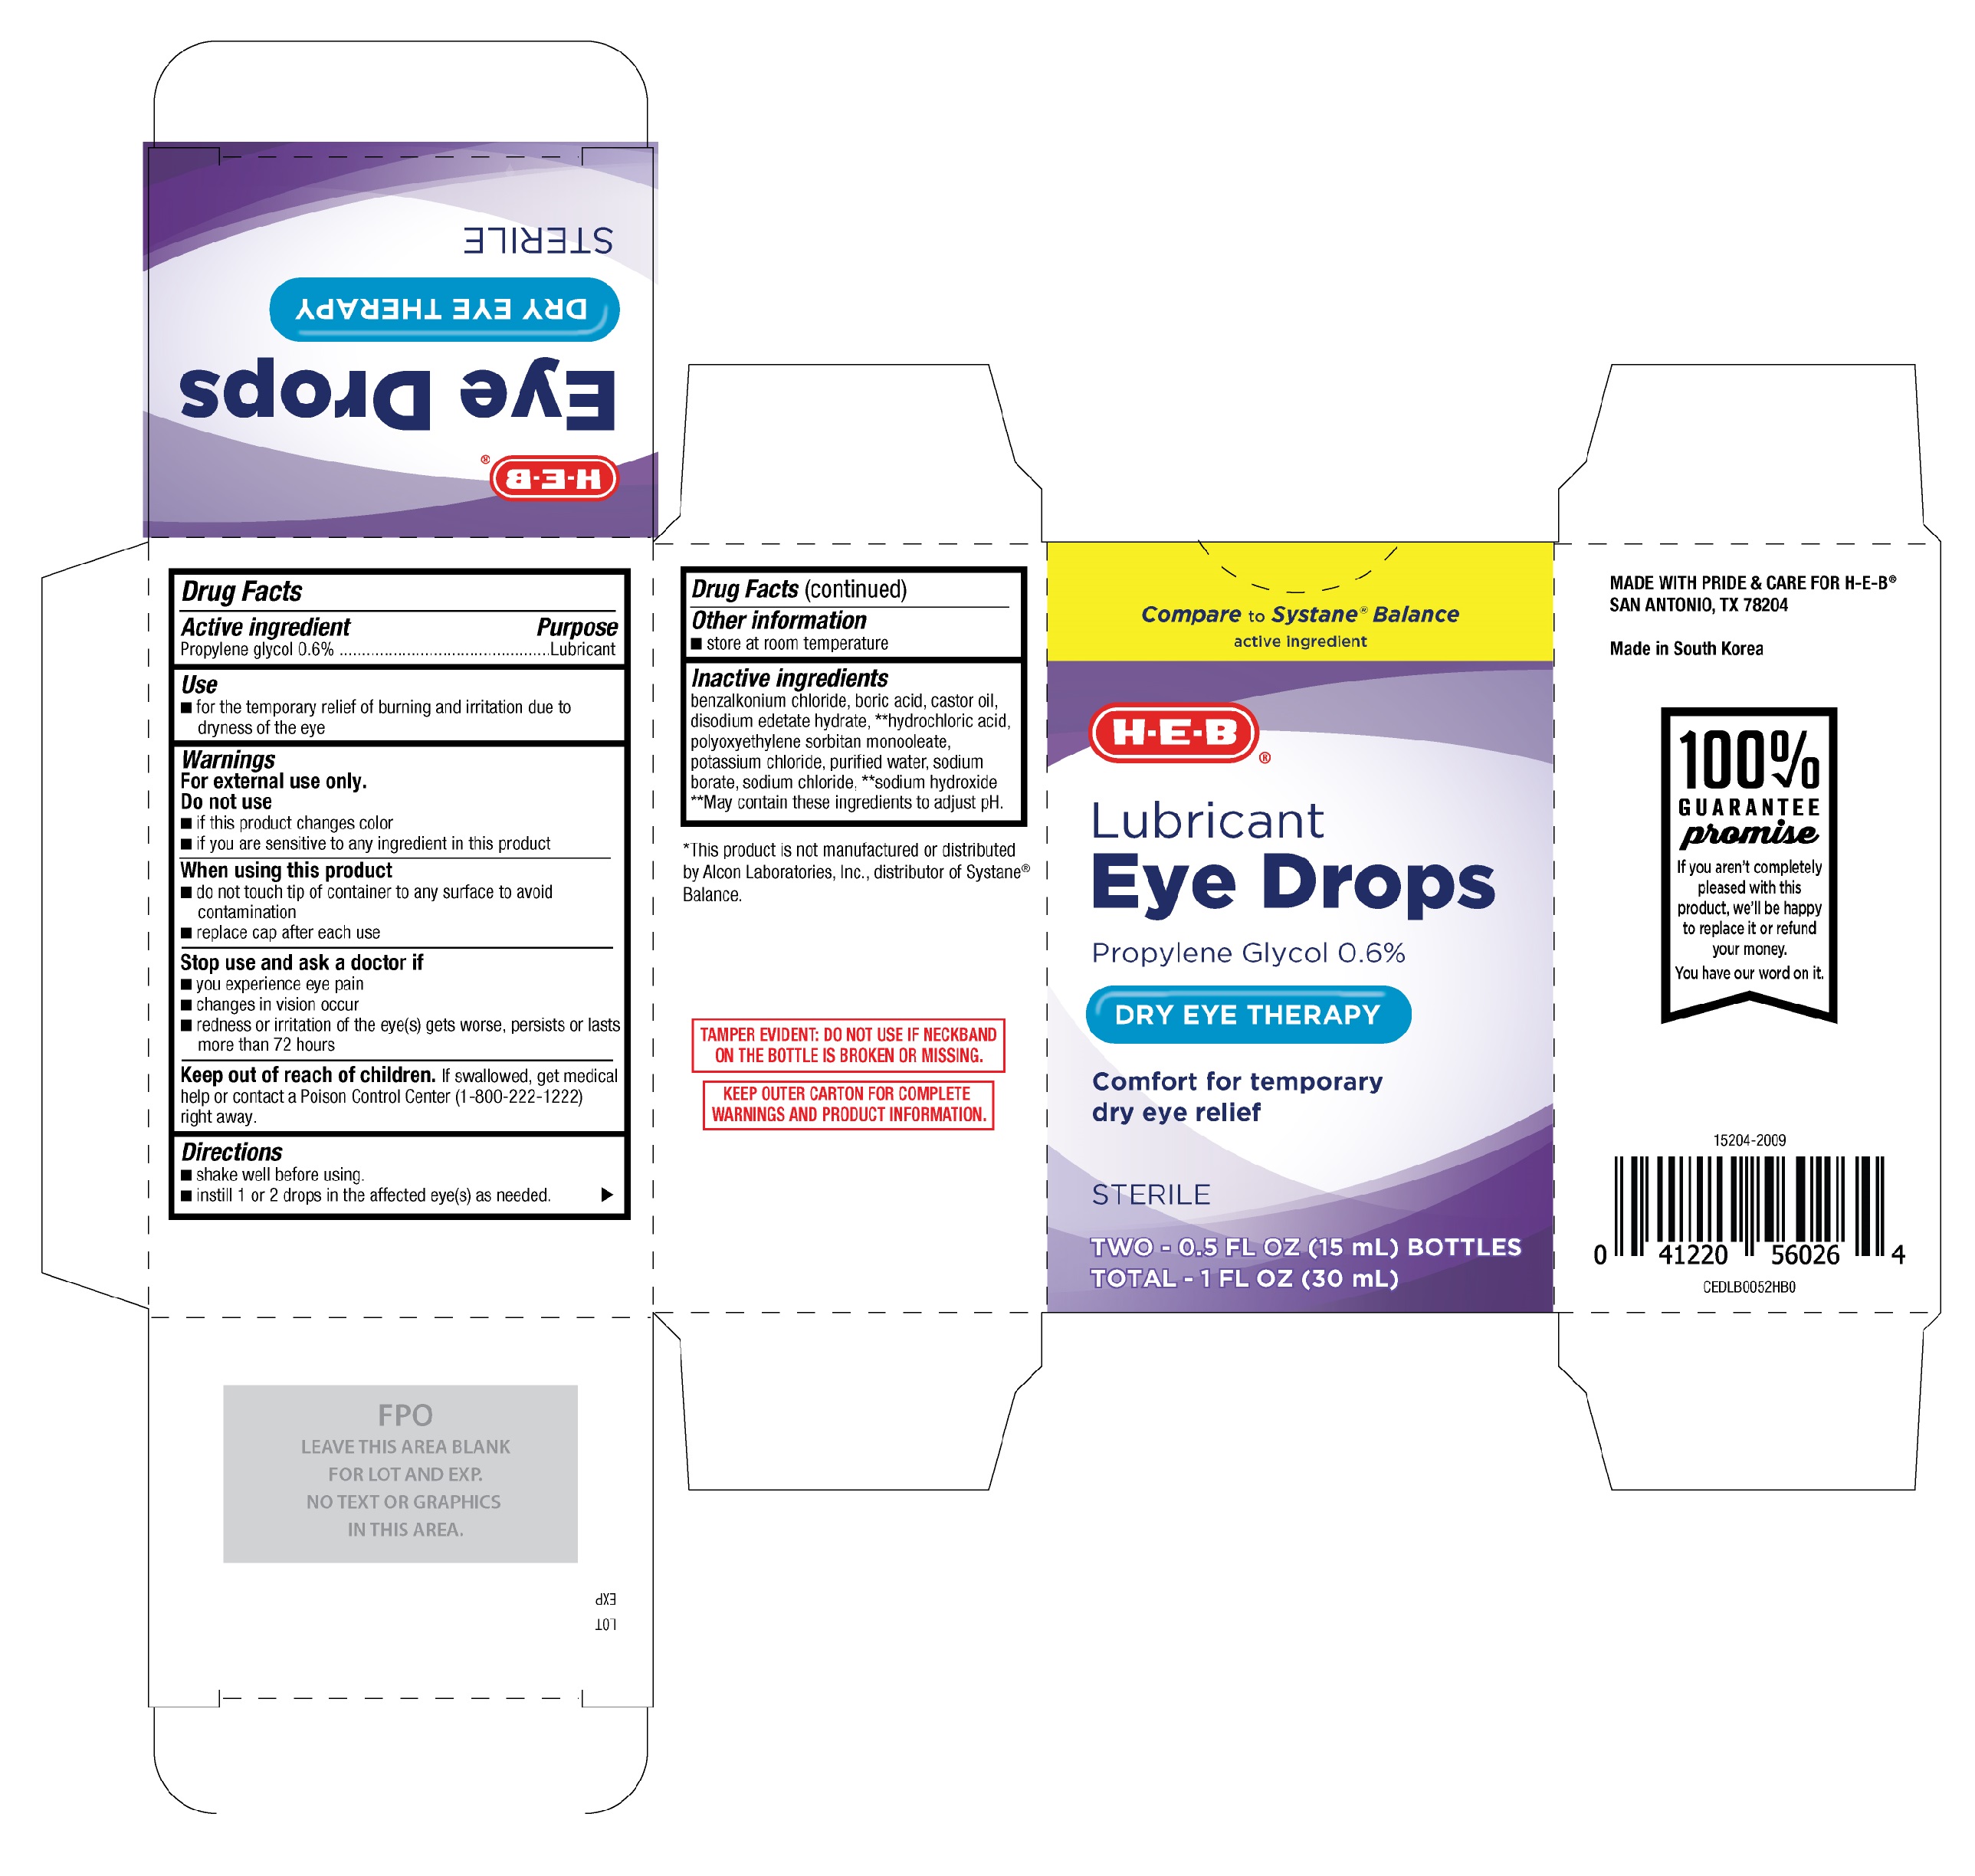 HEB Lubricant Eye Drops Dry Eye Therapy 15mL twin pack